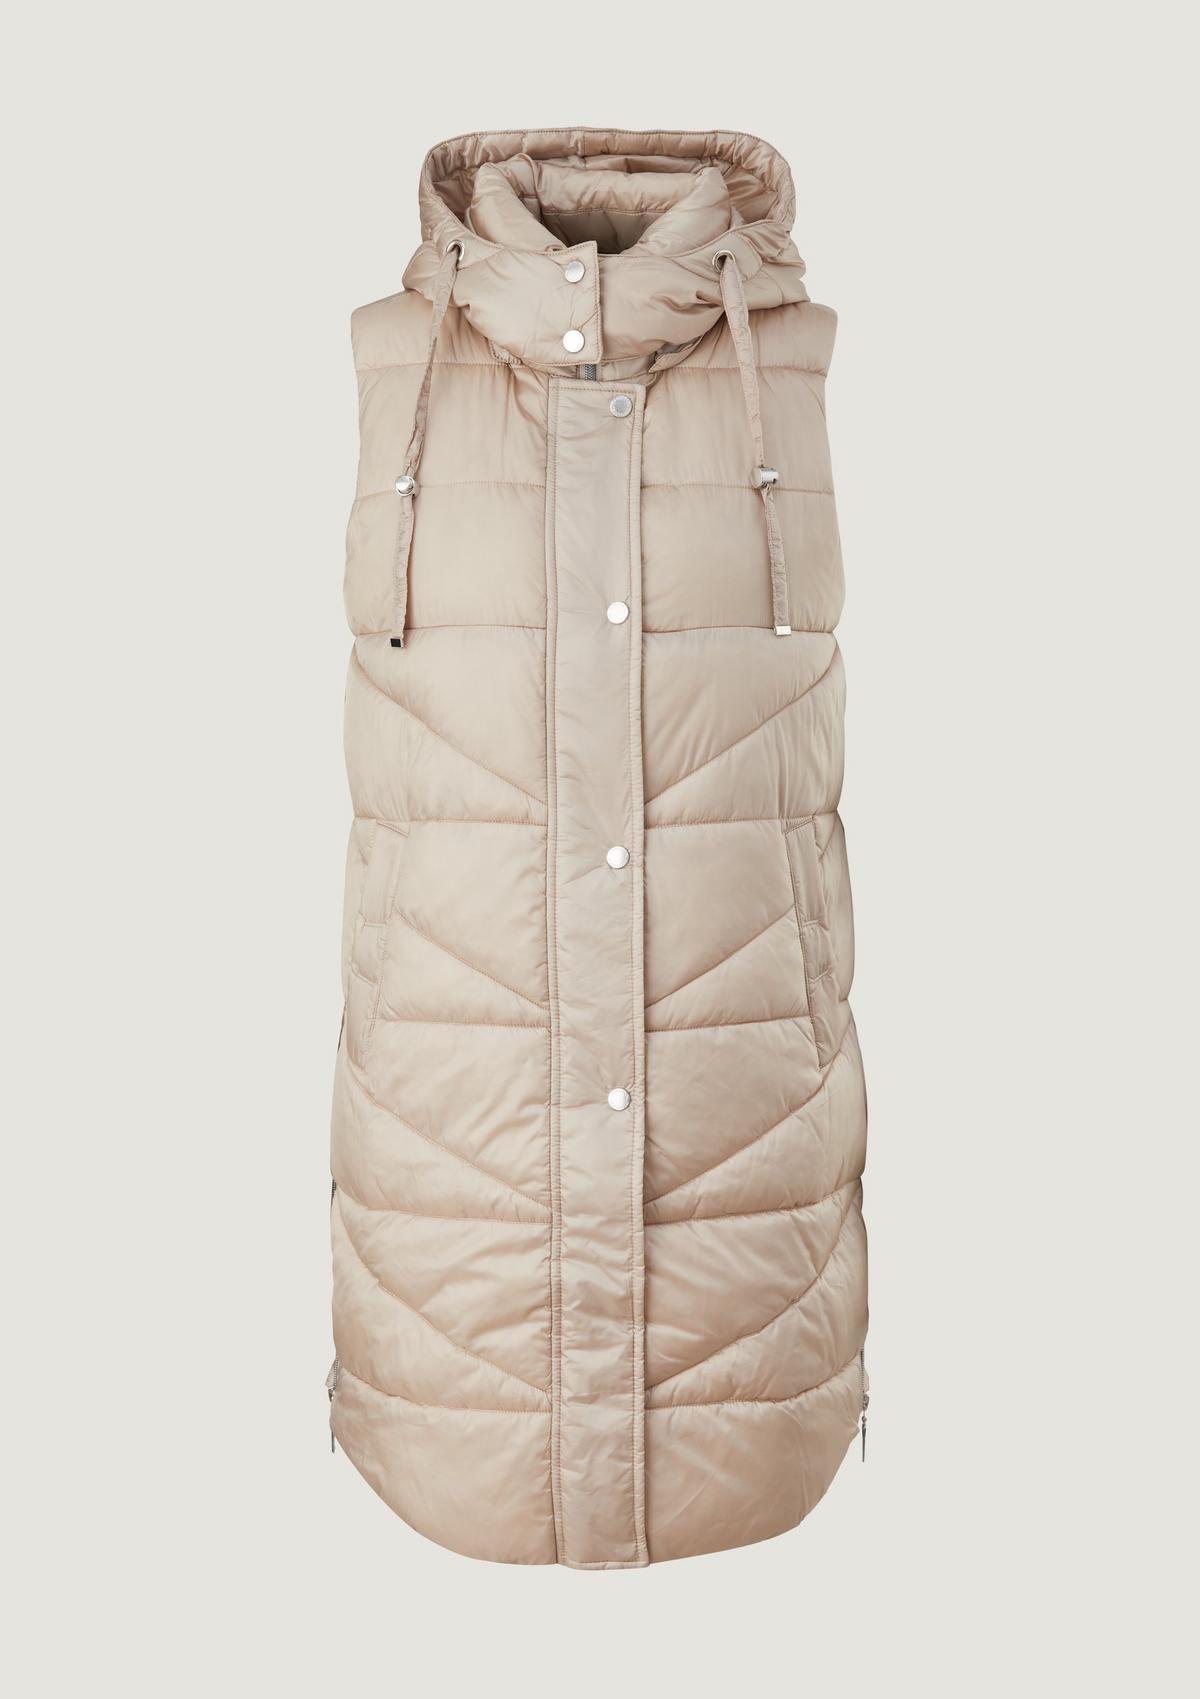 Long quilted body warmer with a hood - beige